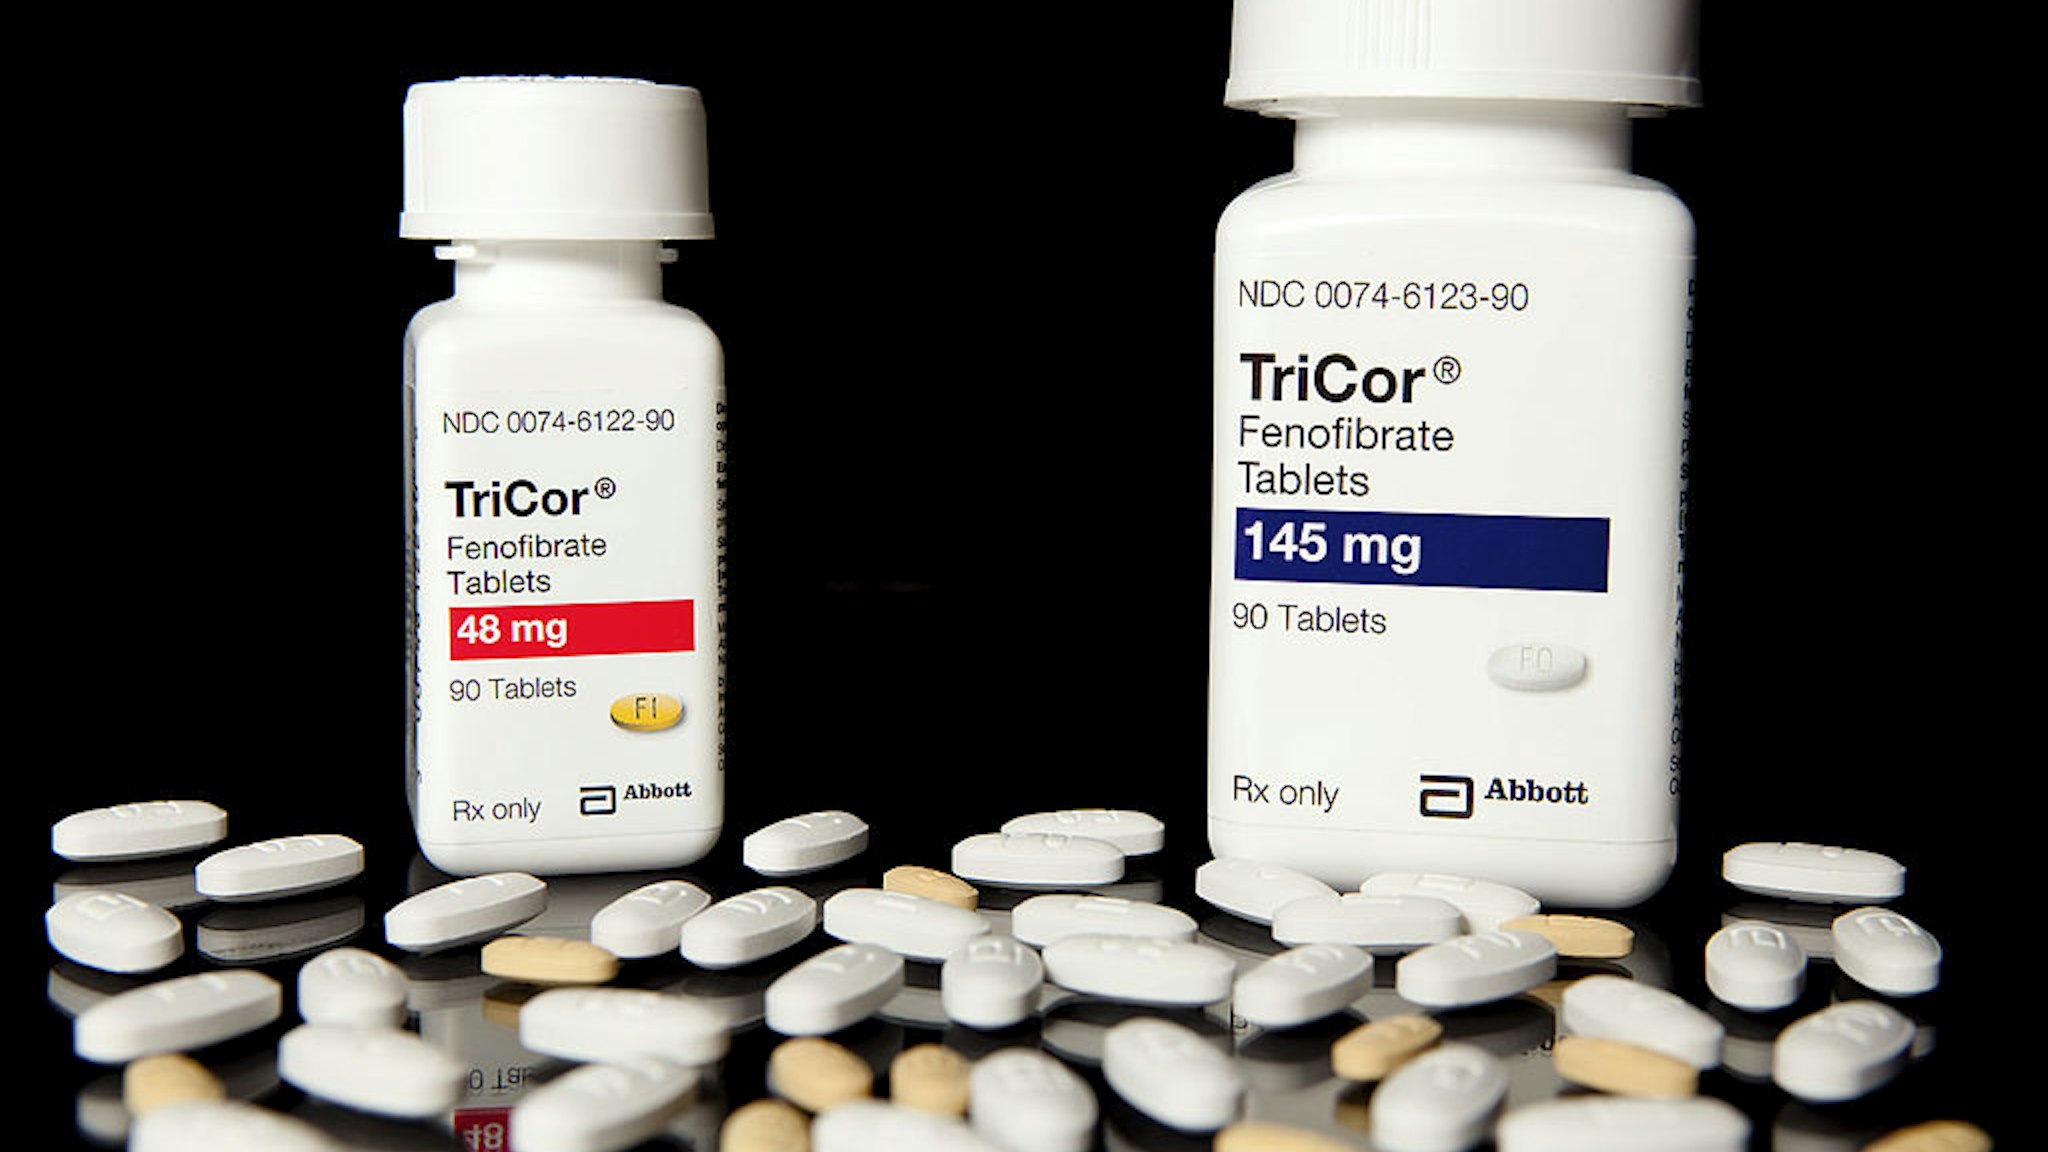 Abbott Laboratories' cholesterol drug TriCor sits on display at New London Pharmacy in New York, U.S., on Monday, Sept. 28, 2009.